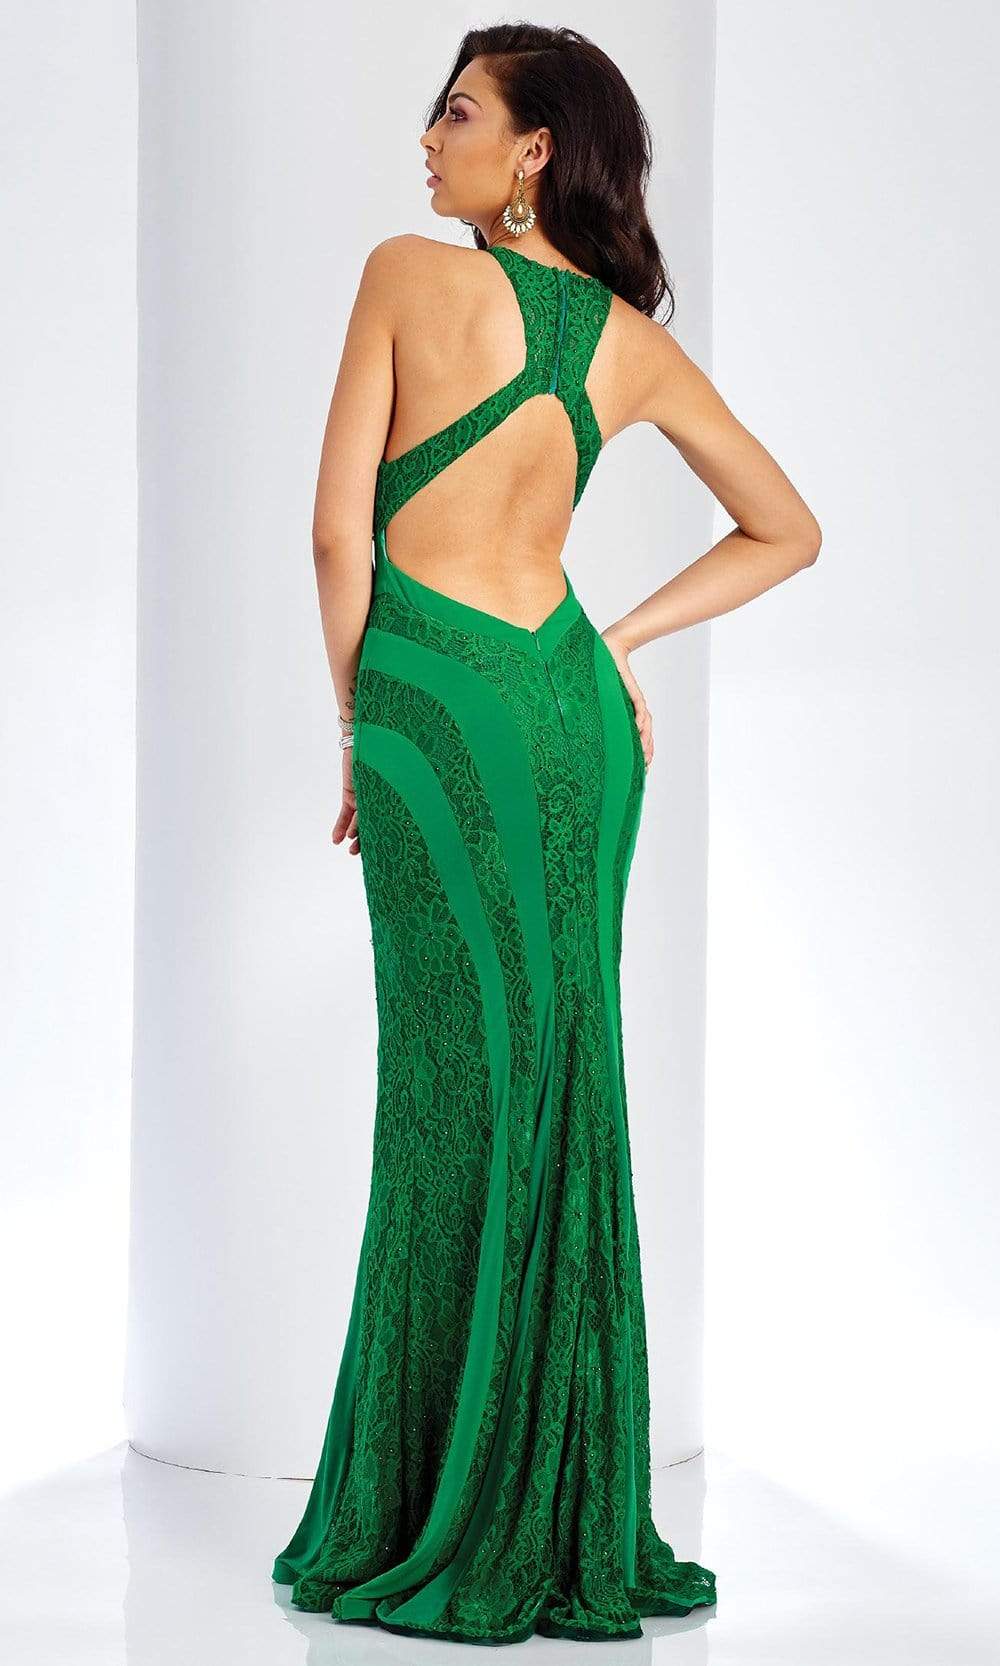 Clarisse - 4931 Embroidered Halter Sheath Dress Special Occasion Dress 0 / Emerald